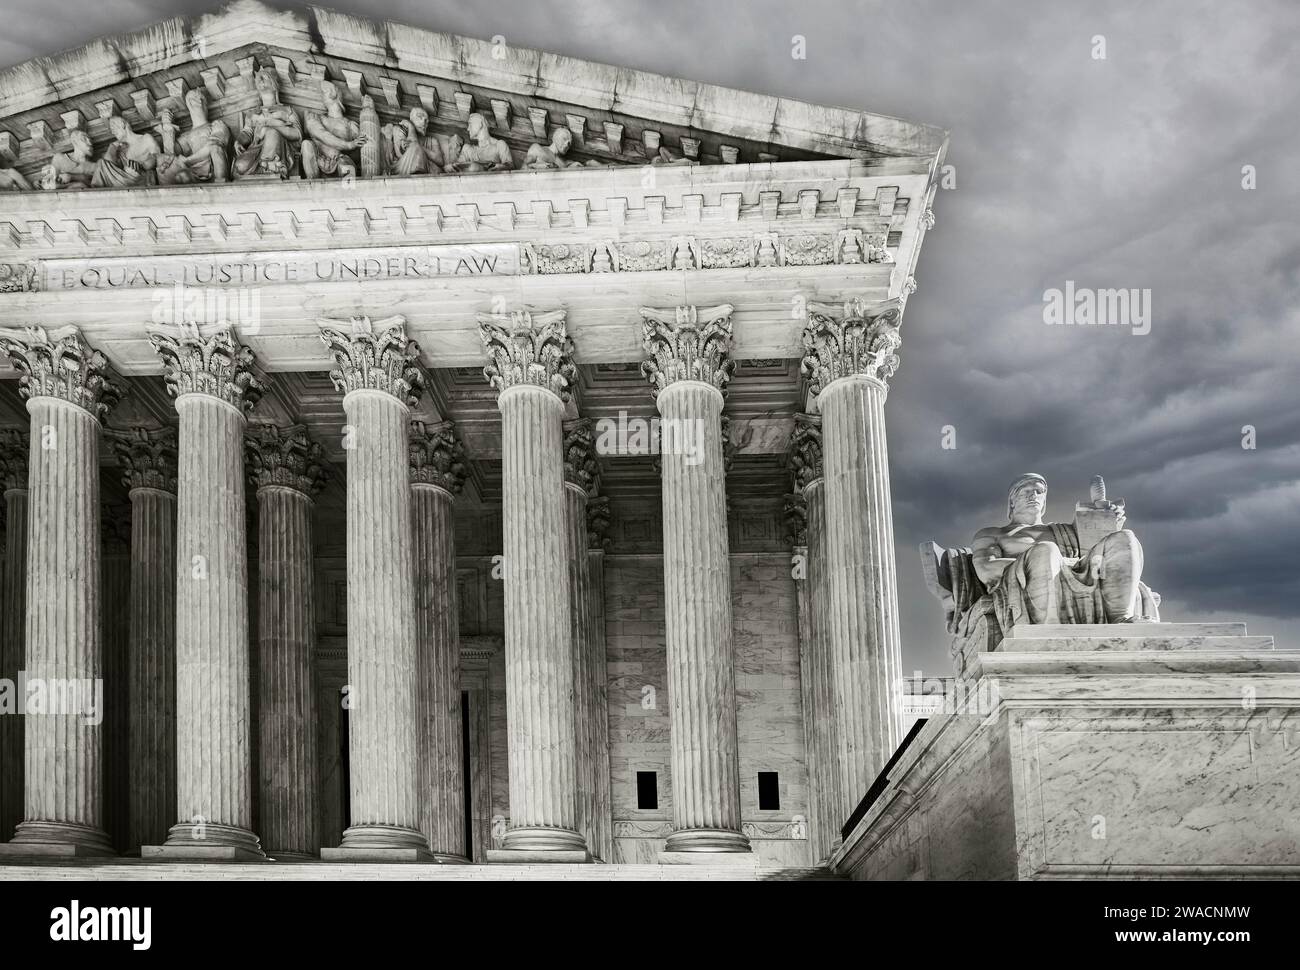 The seated marble statue 'Guardian' in the foreground of the US Supreme Court, of neoclassical architecture, a controversial court in Washington DC Stock Photo